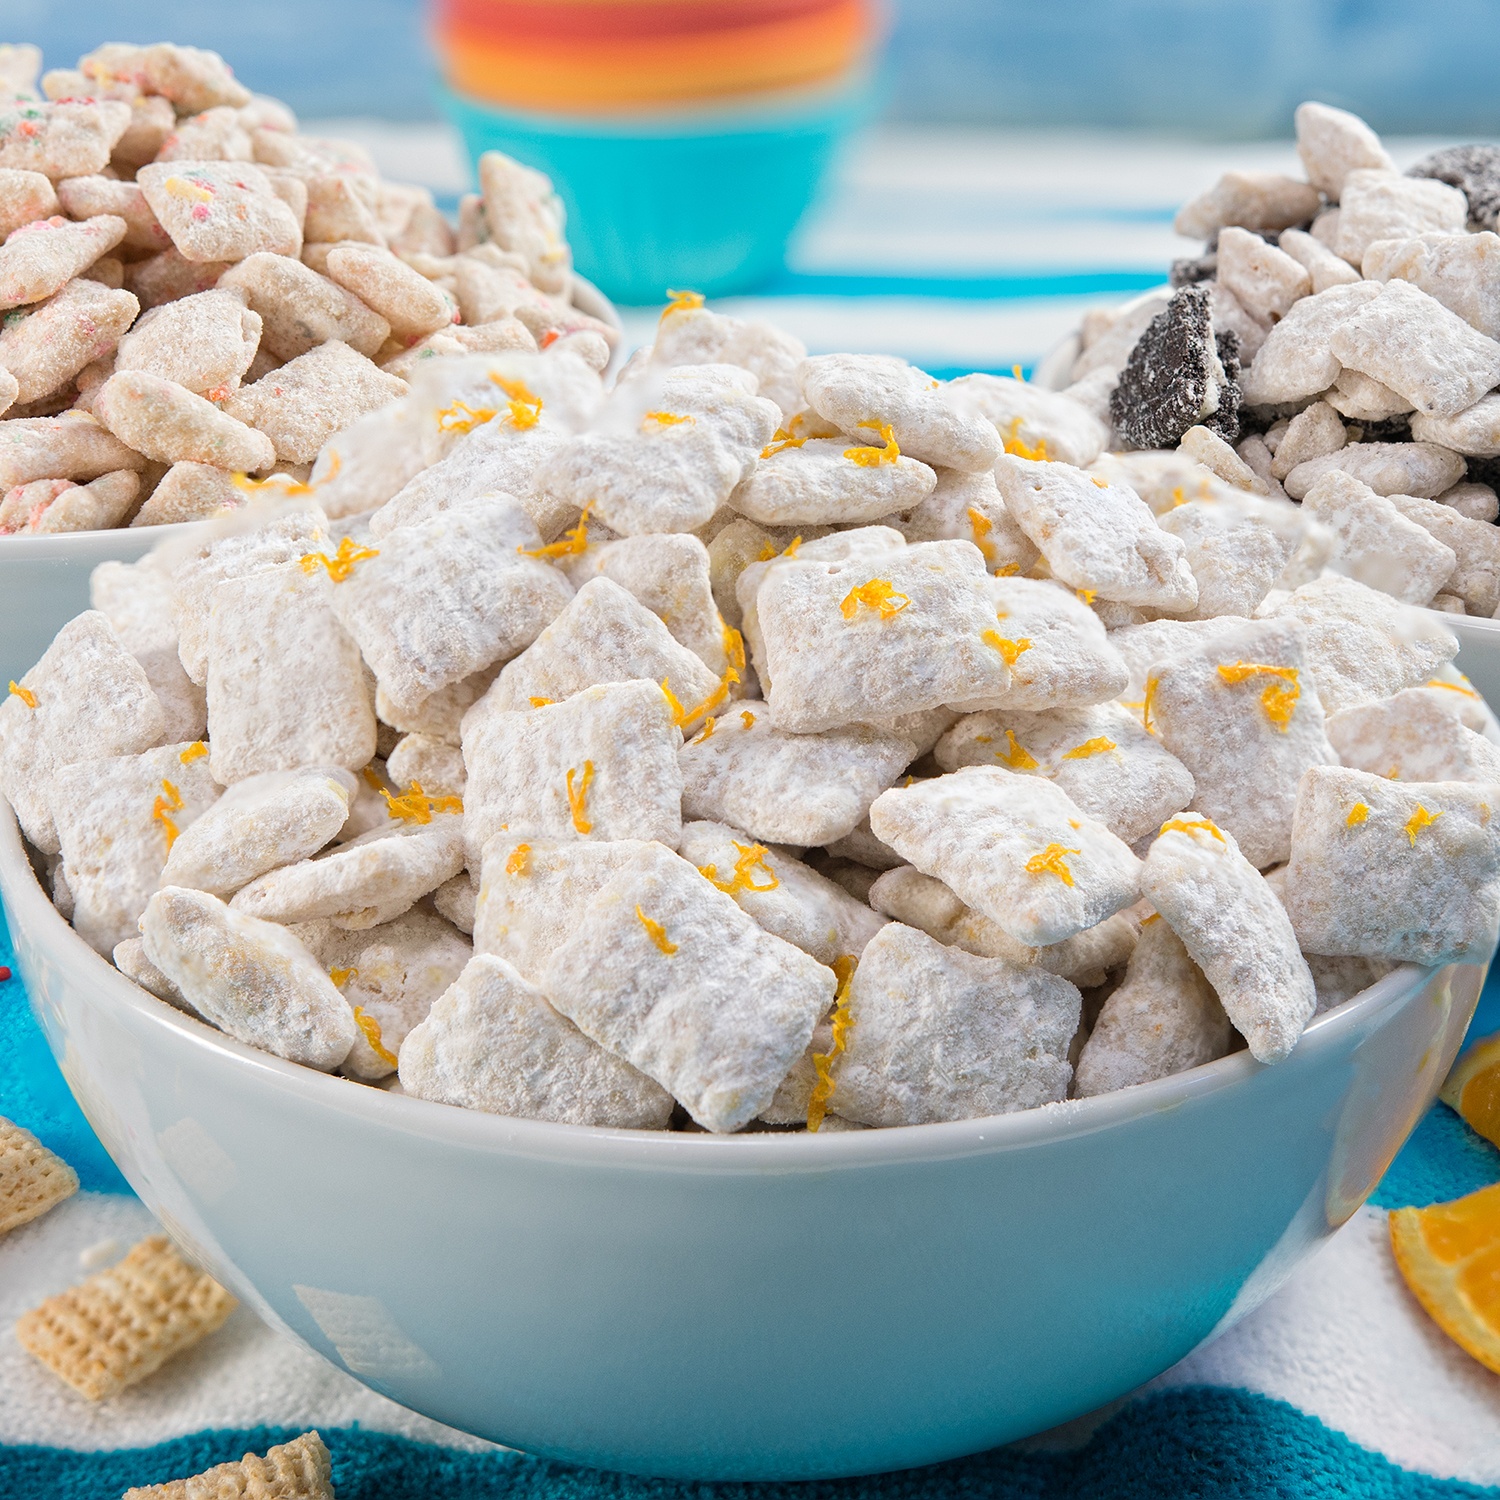 Three easy Muddy Buddies flavors that taste like summer: Cake Batter, Orange Creamsicle, and Cookies & Cream. These no-bake 10-minute treats are pure fun.